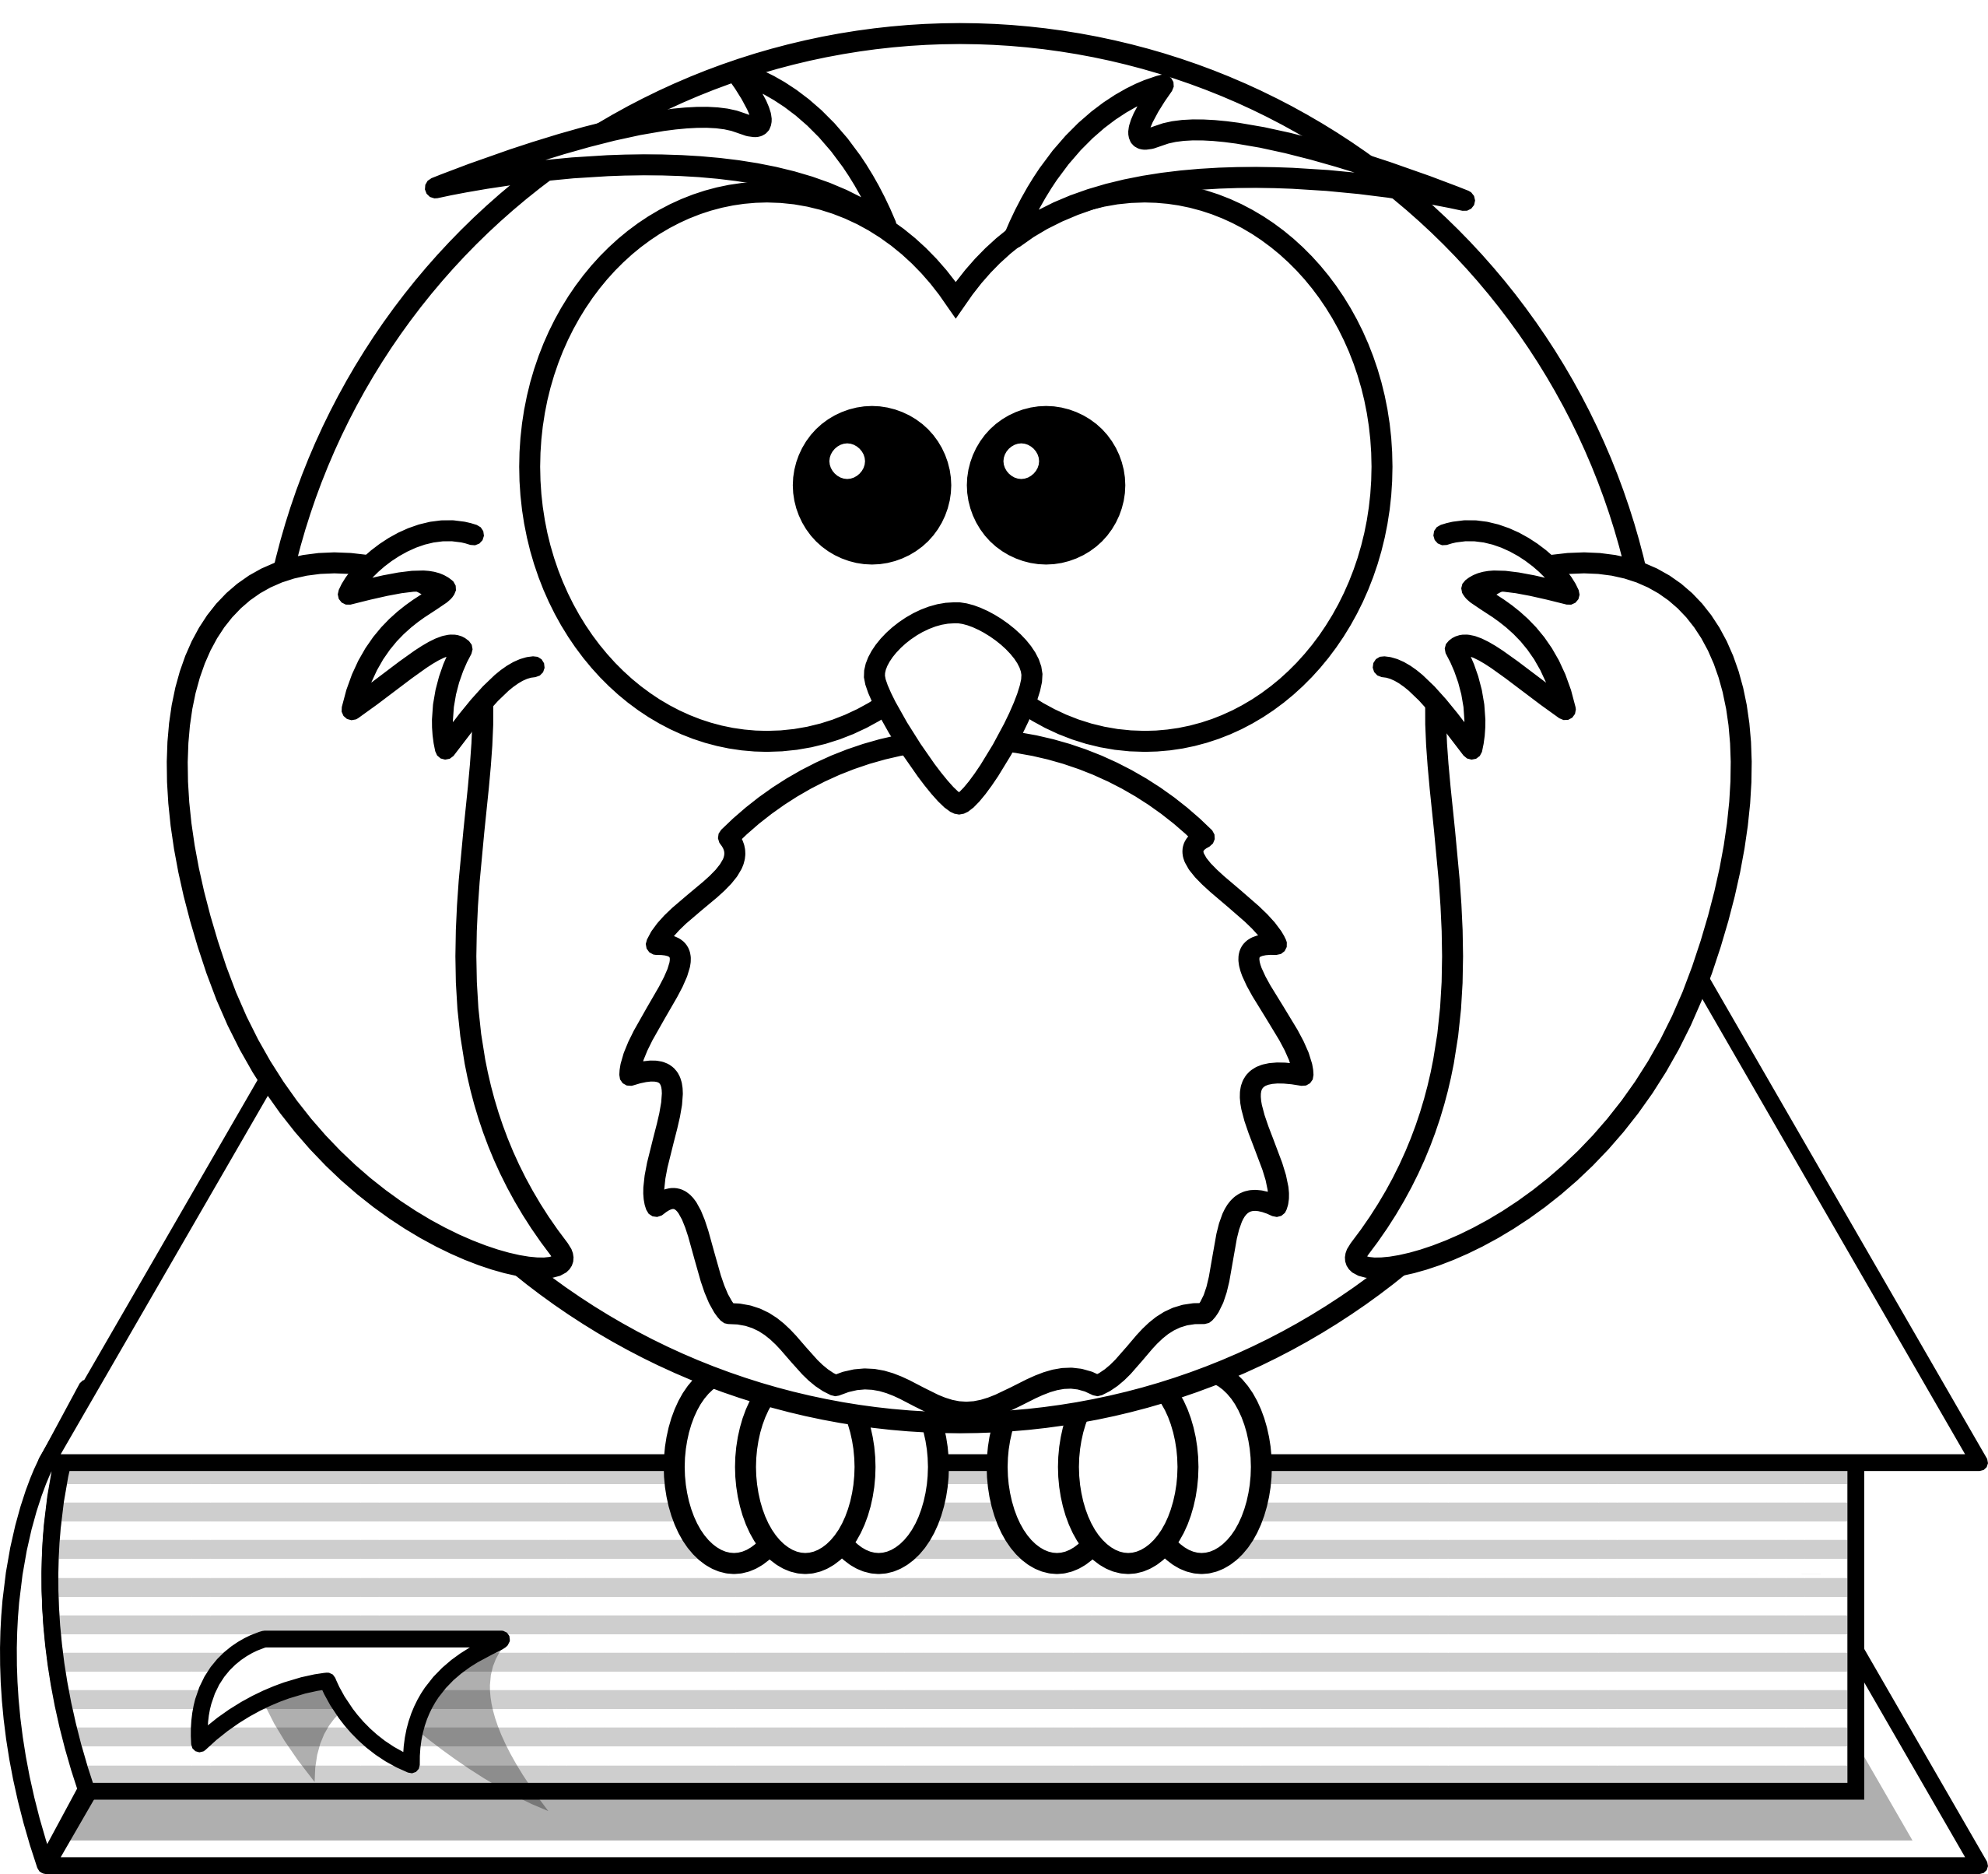 Free Black And White Cartoon Owls, Download Free Clip Art.